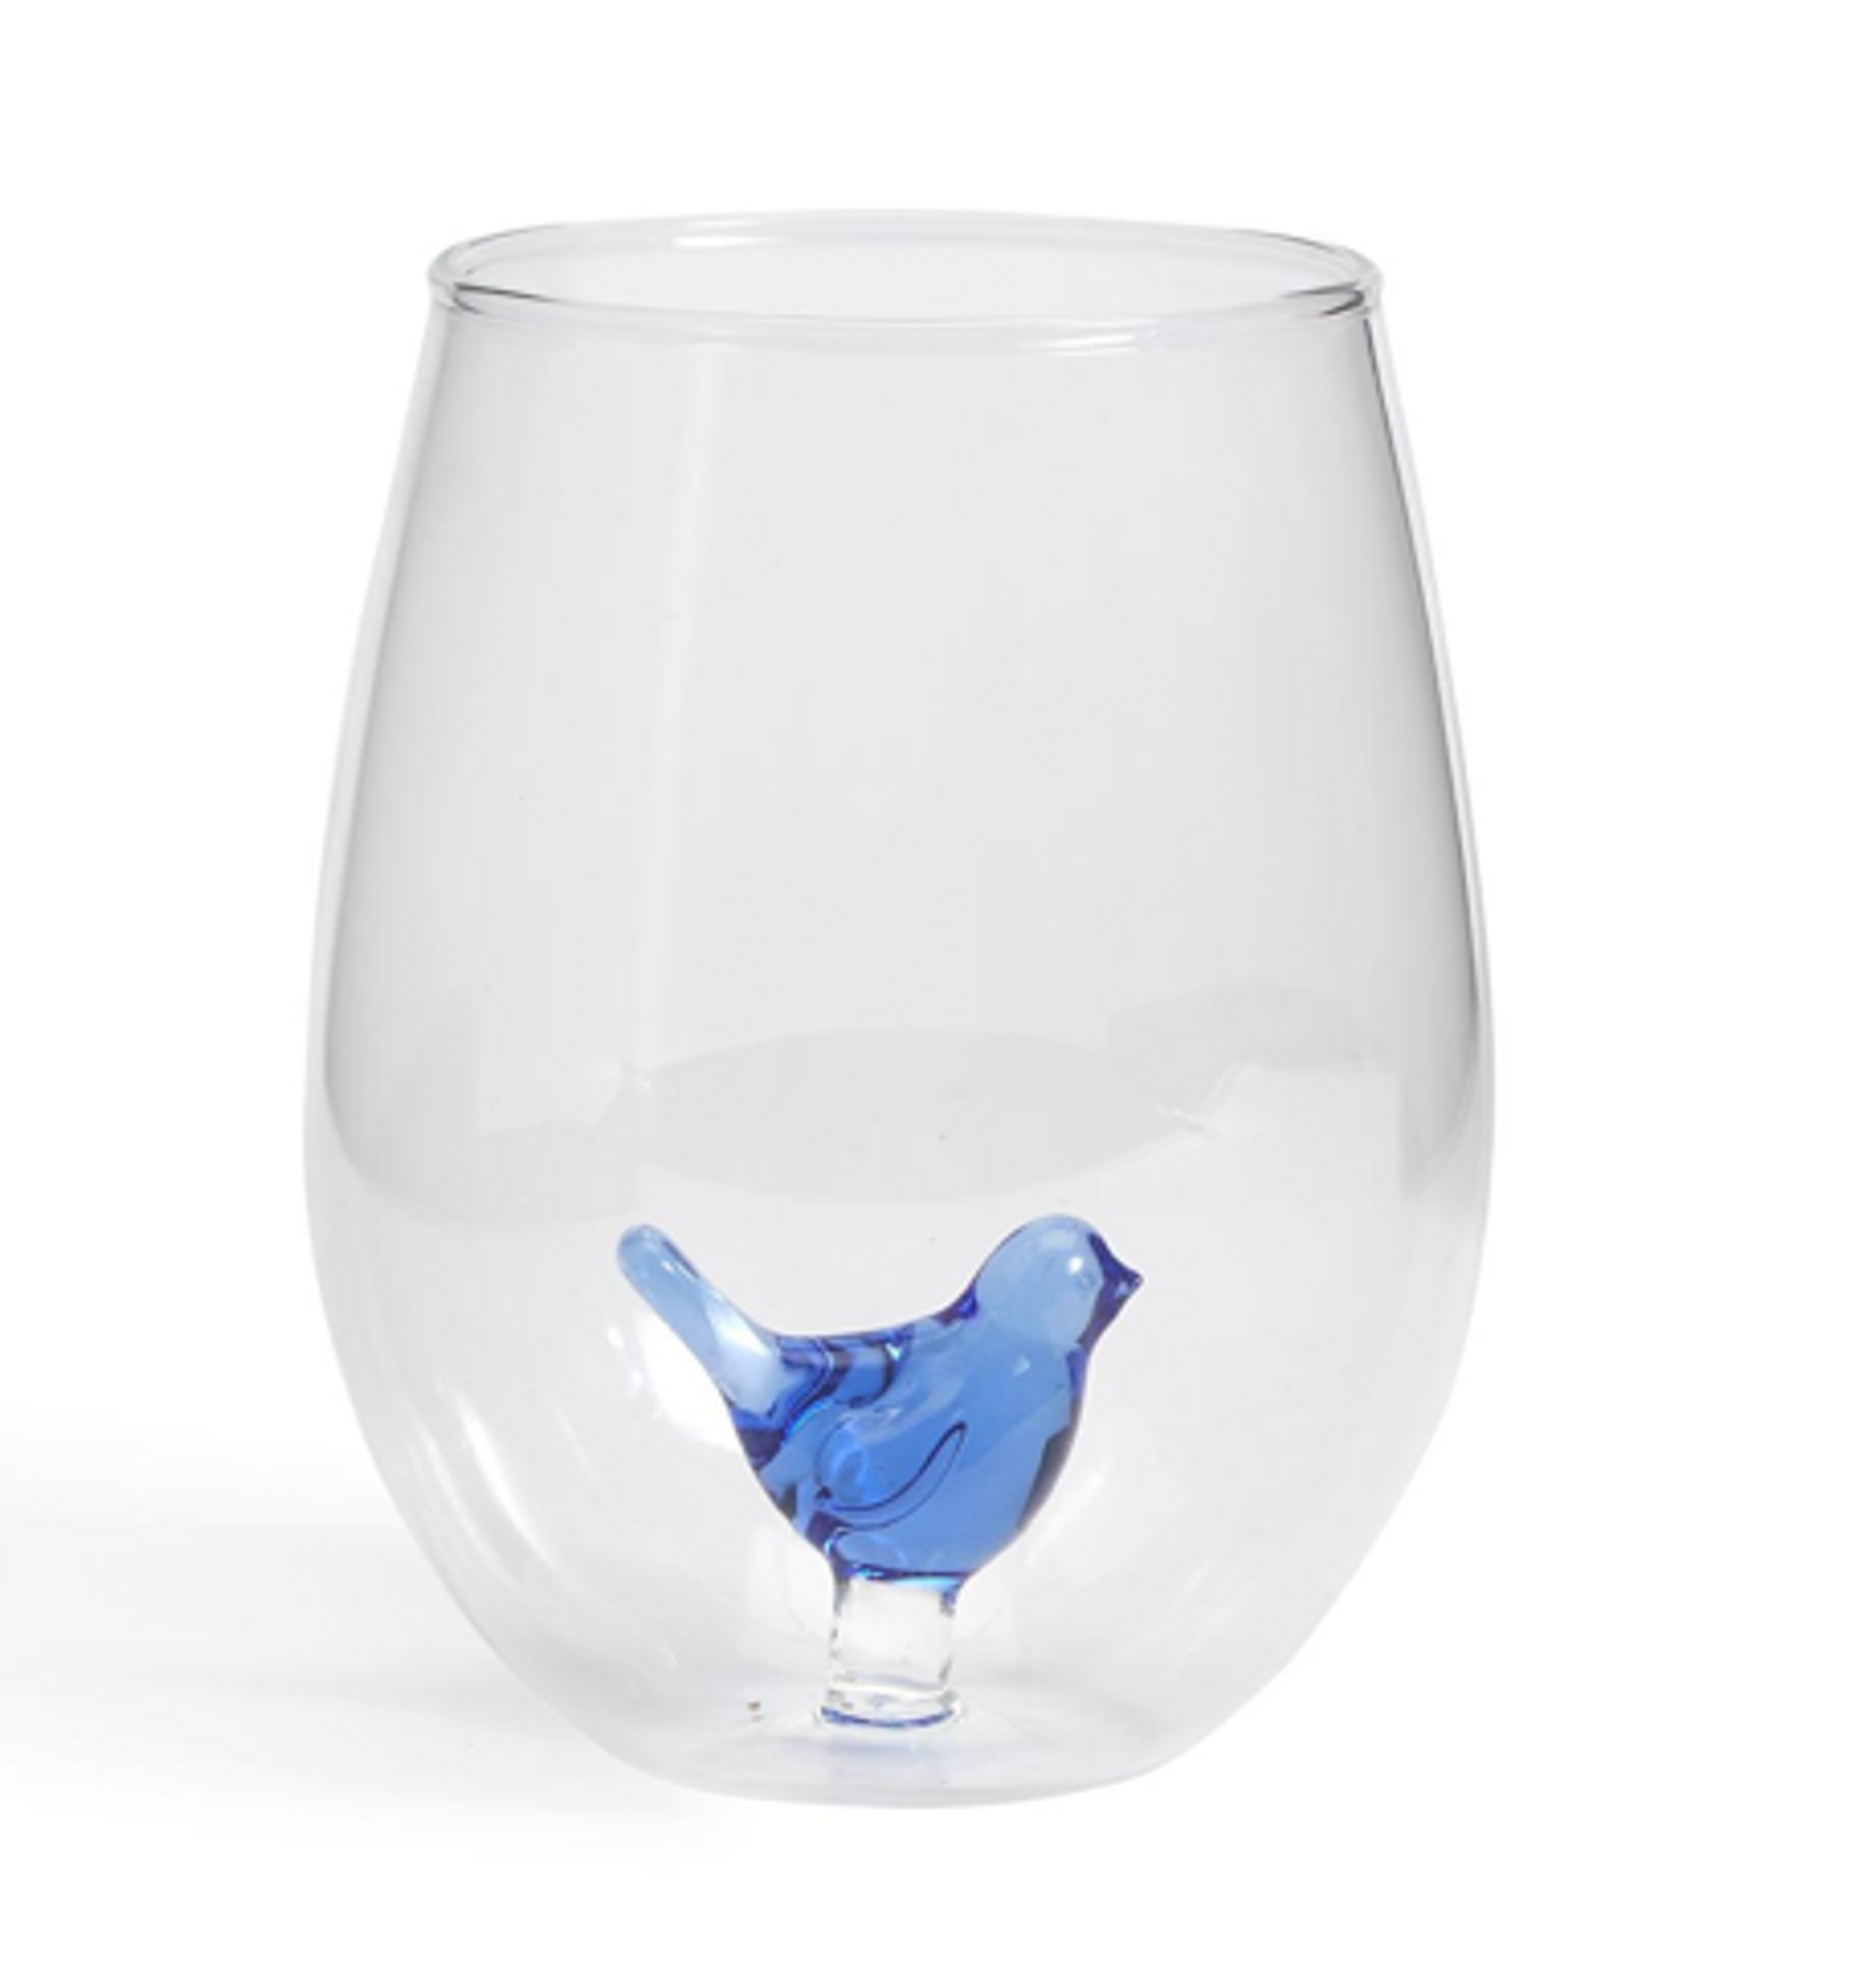 Blue Stemless Wine Glasses. Hand Blown Cocktail Drinking Glass